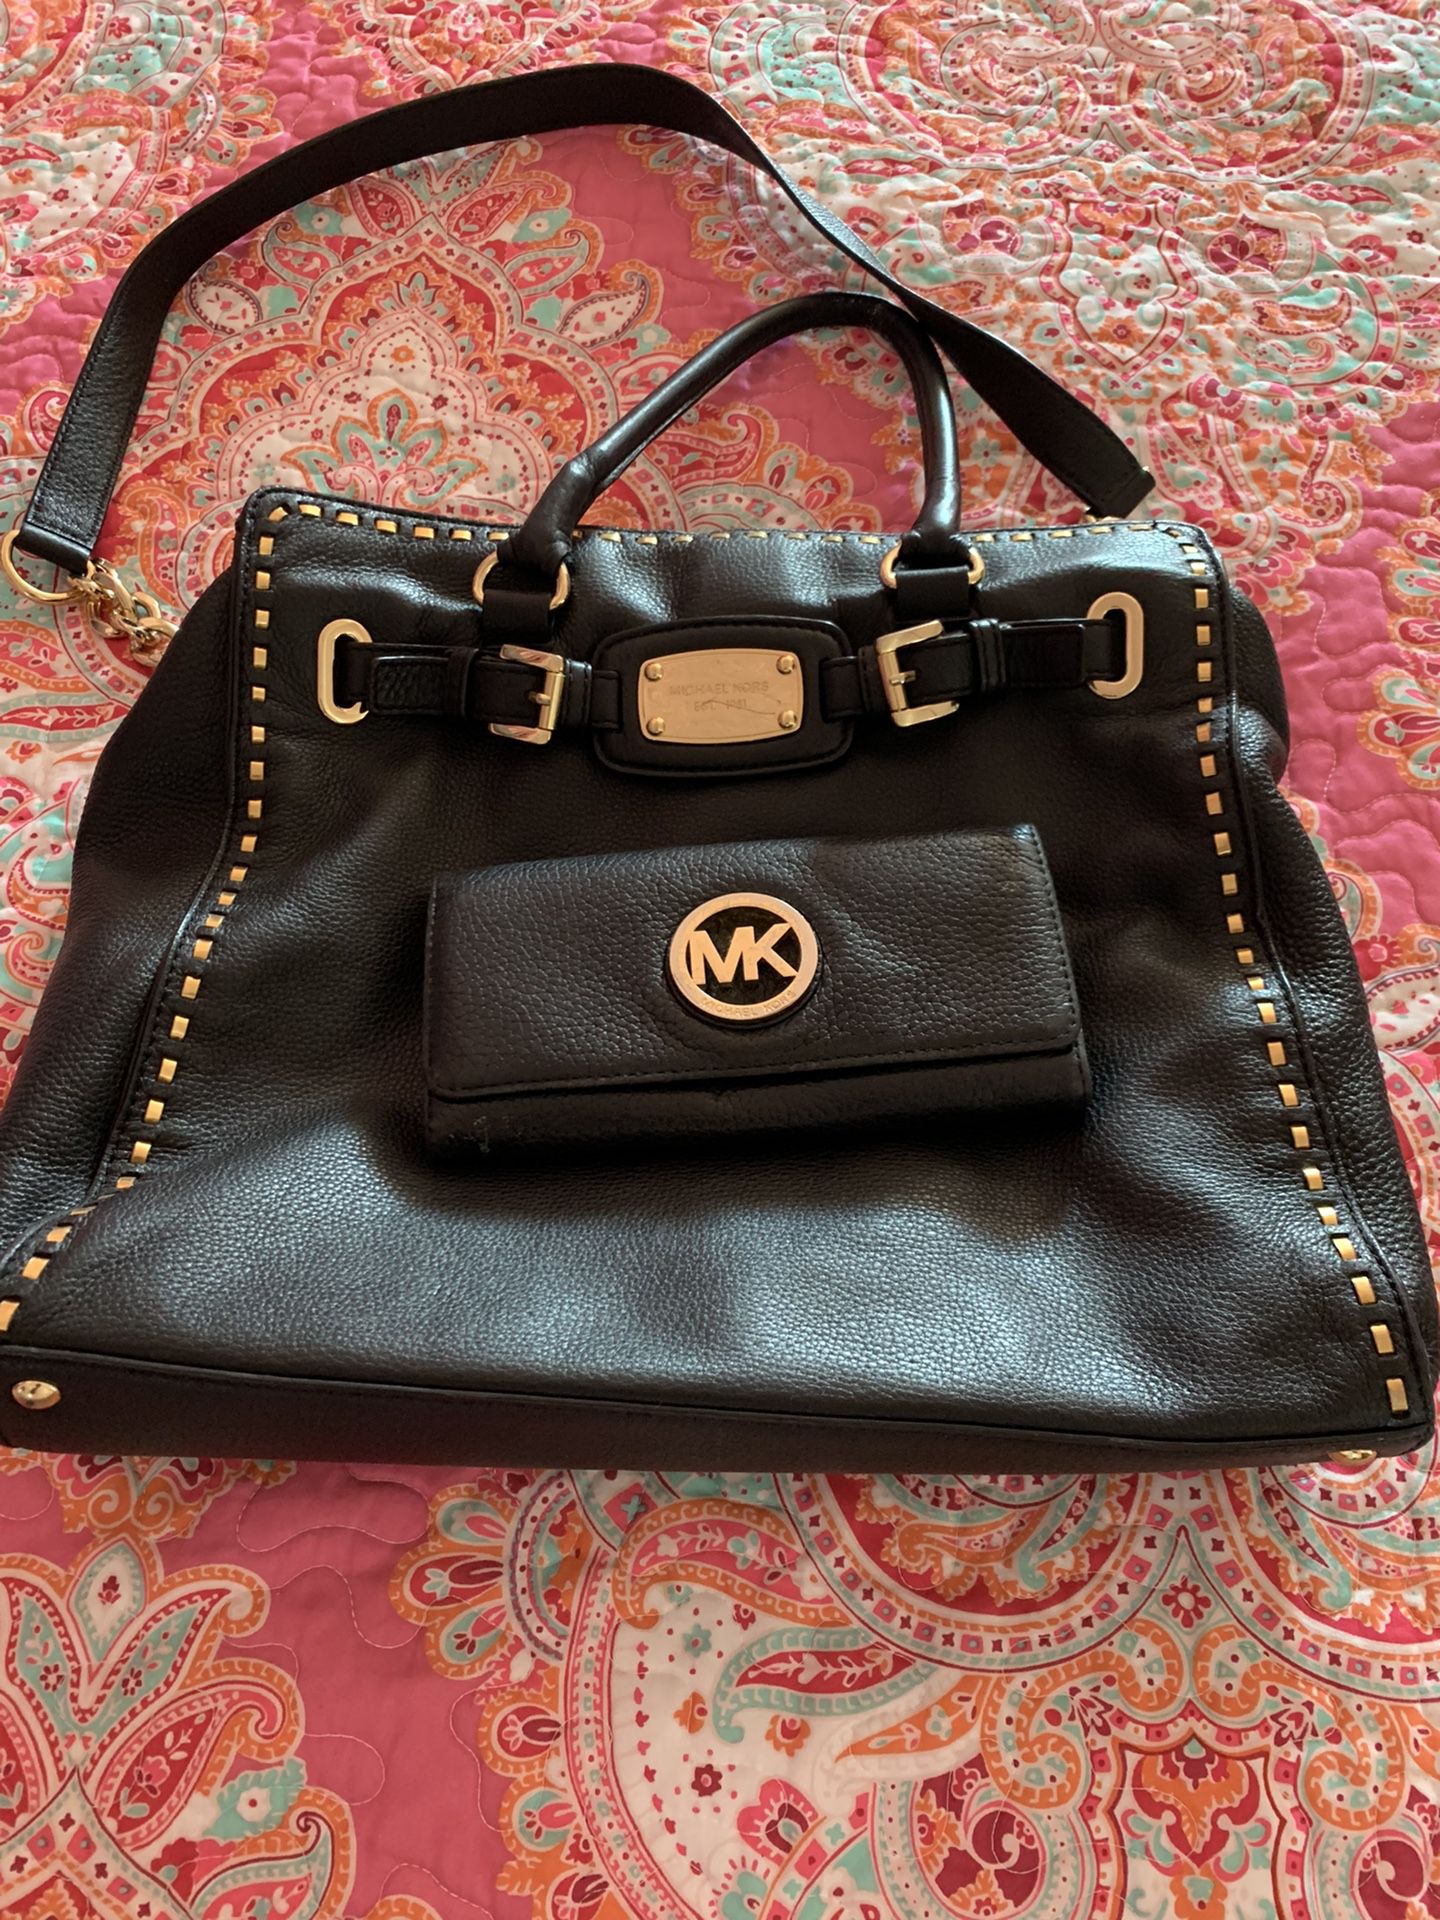 Michael Kors Black Pebble Leather with Gold Accents